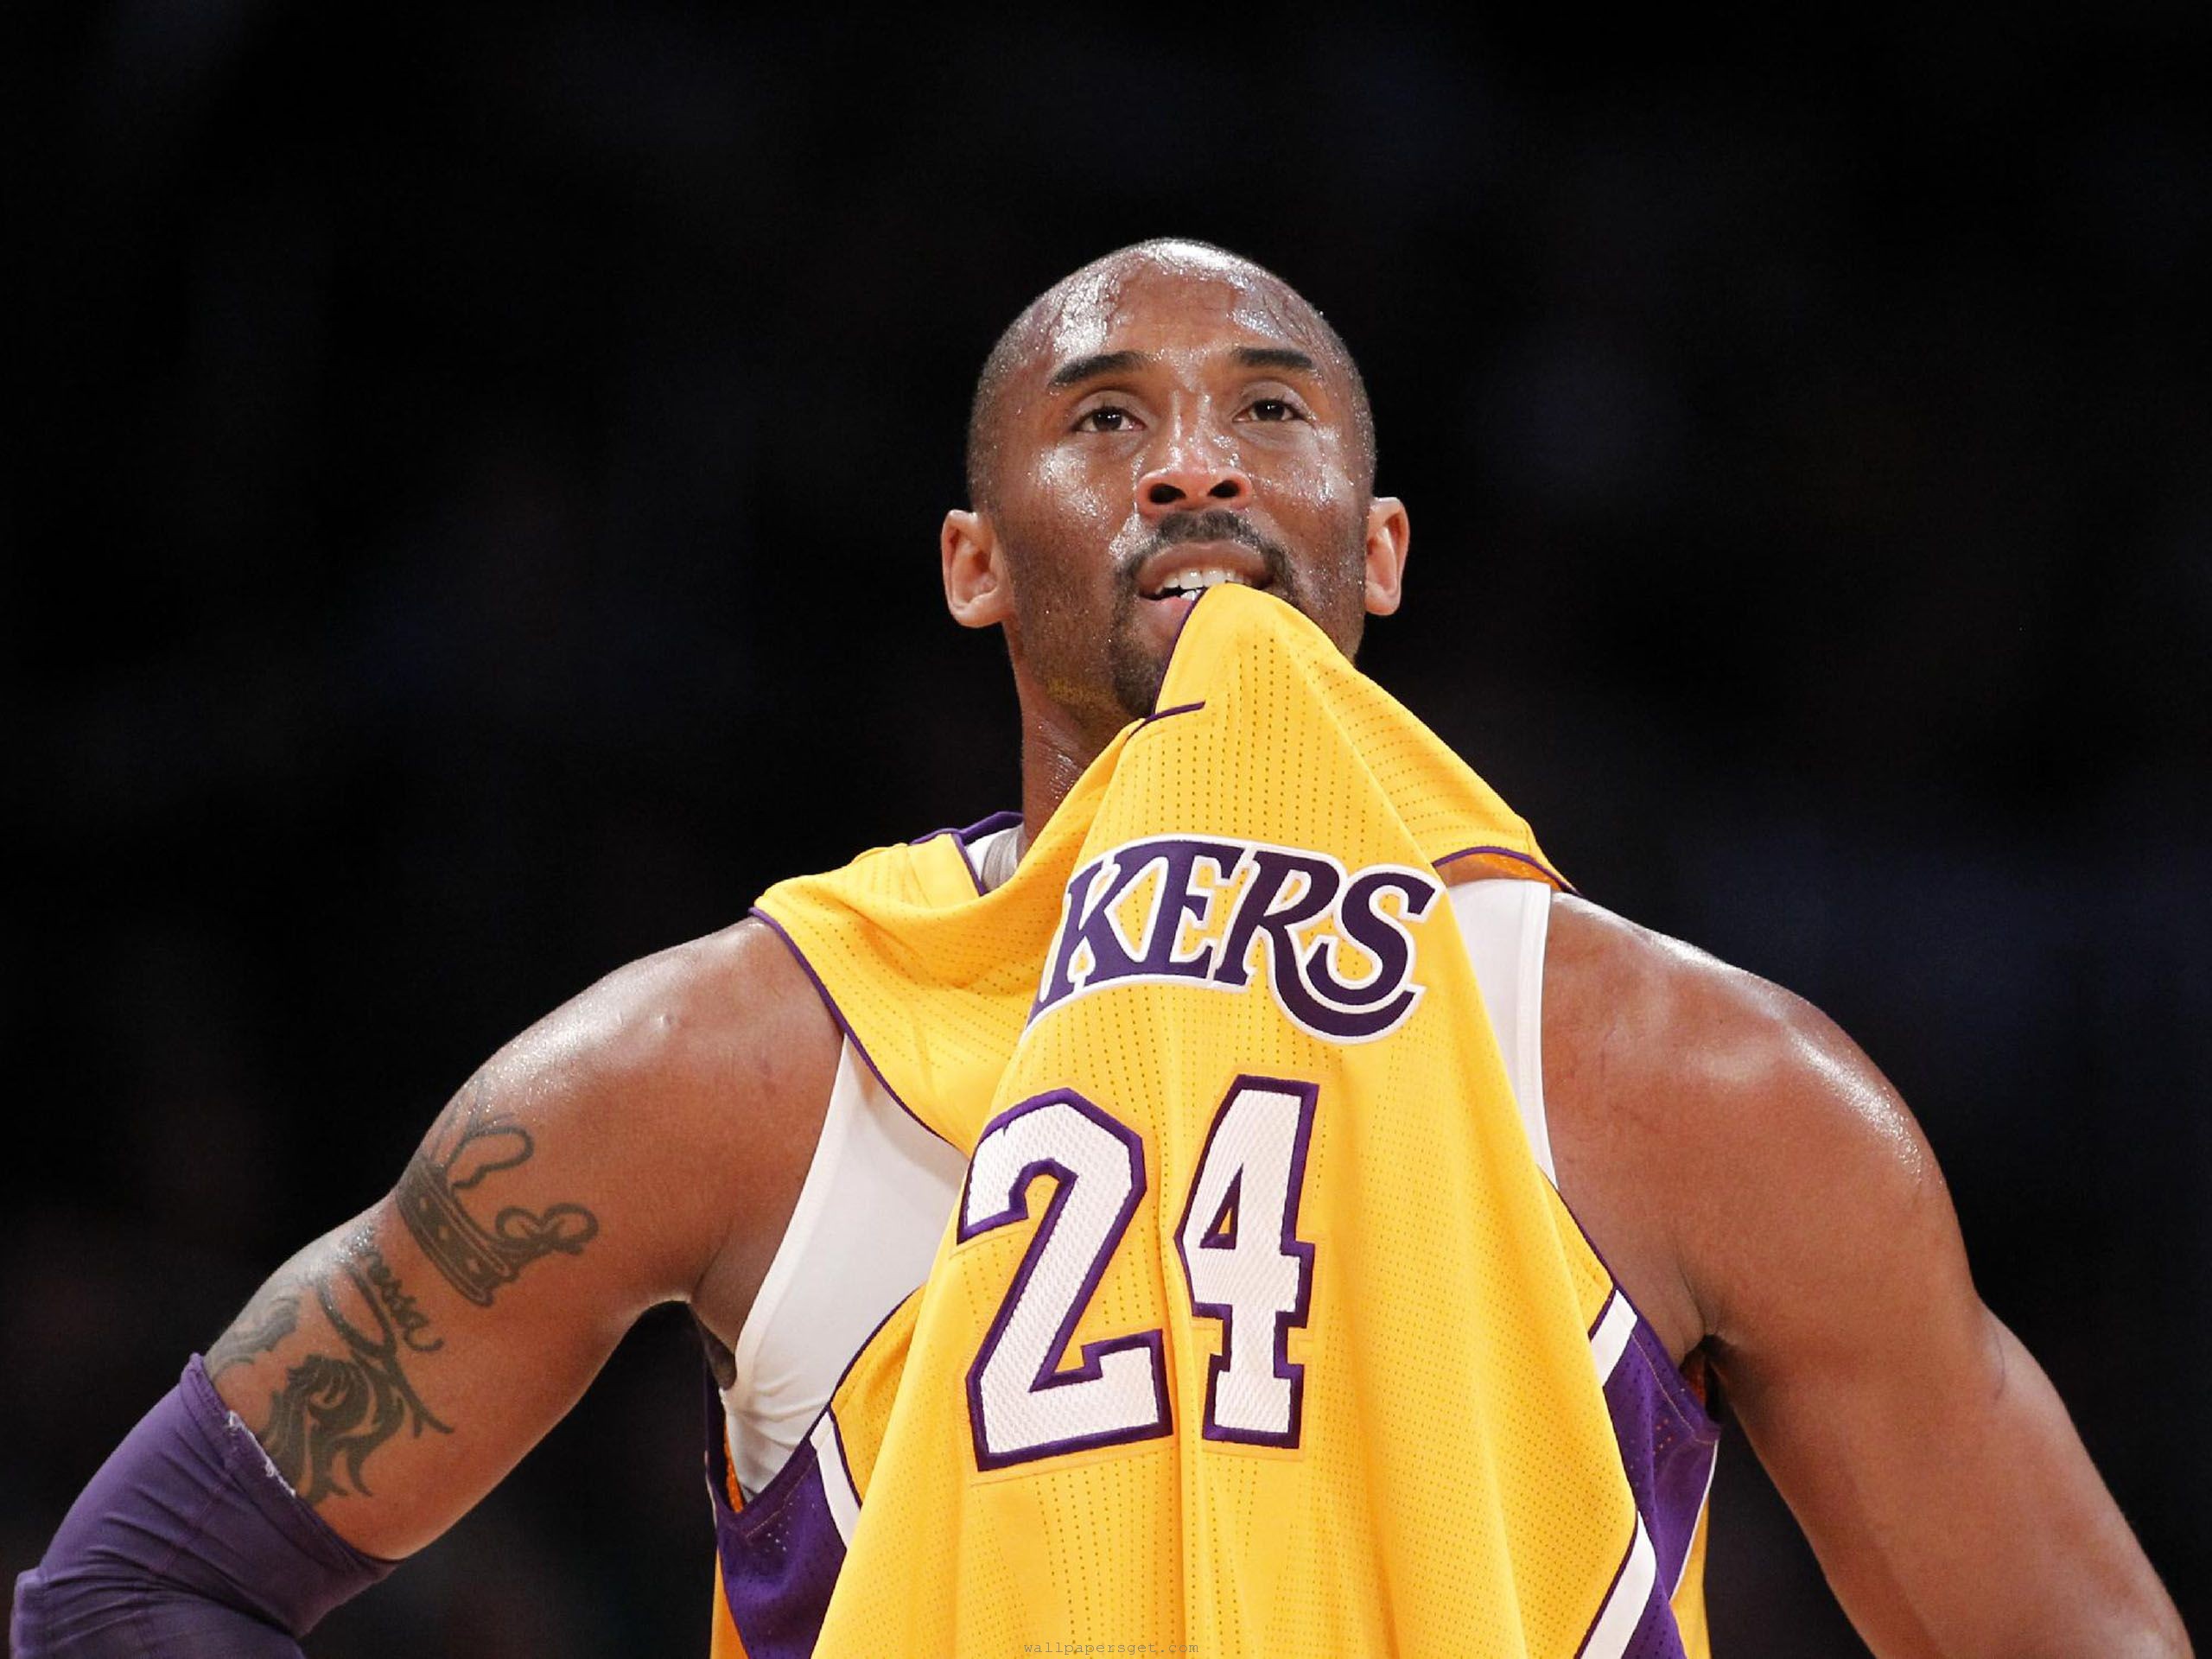 Kobe Bryant's Most Inspirational Quotes